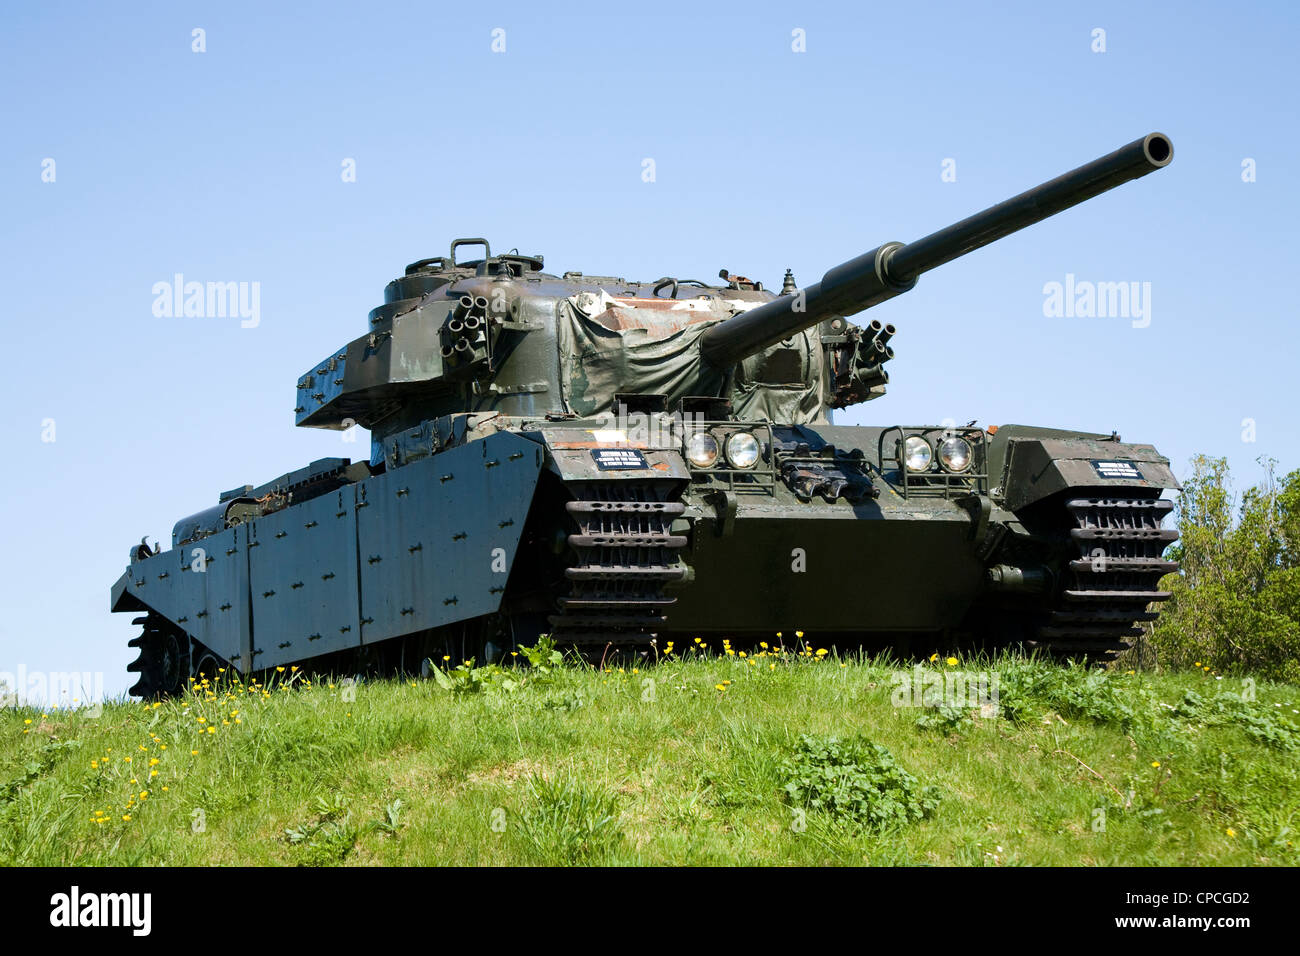 Page 3 - Centurion Tank High Resolution Stock Photography and Images - Alamy